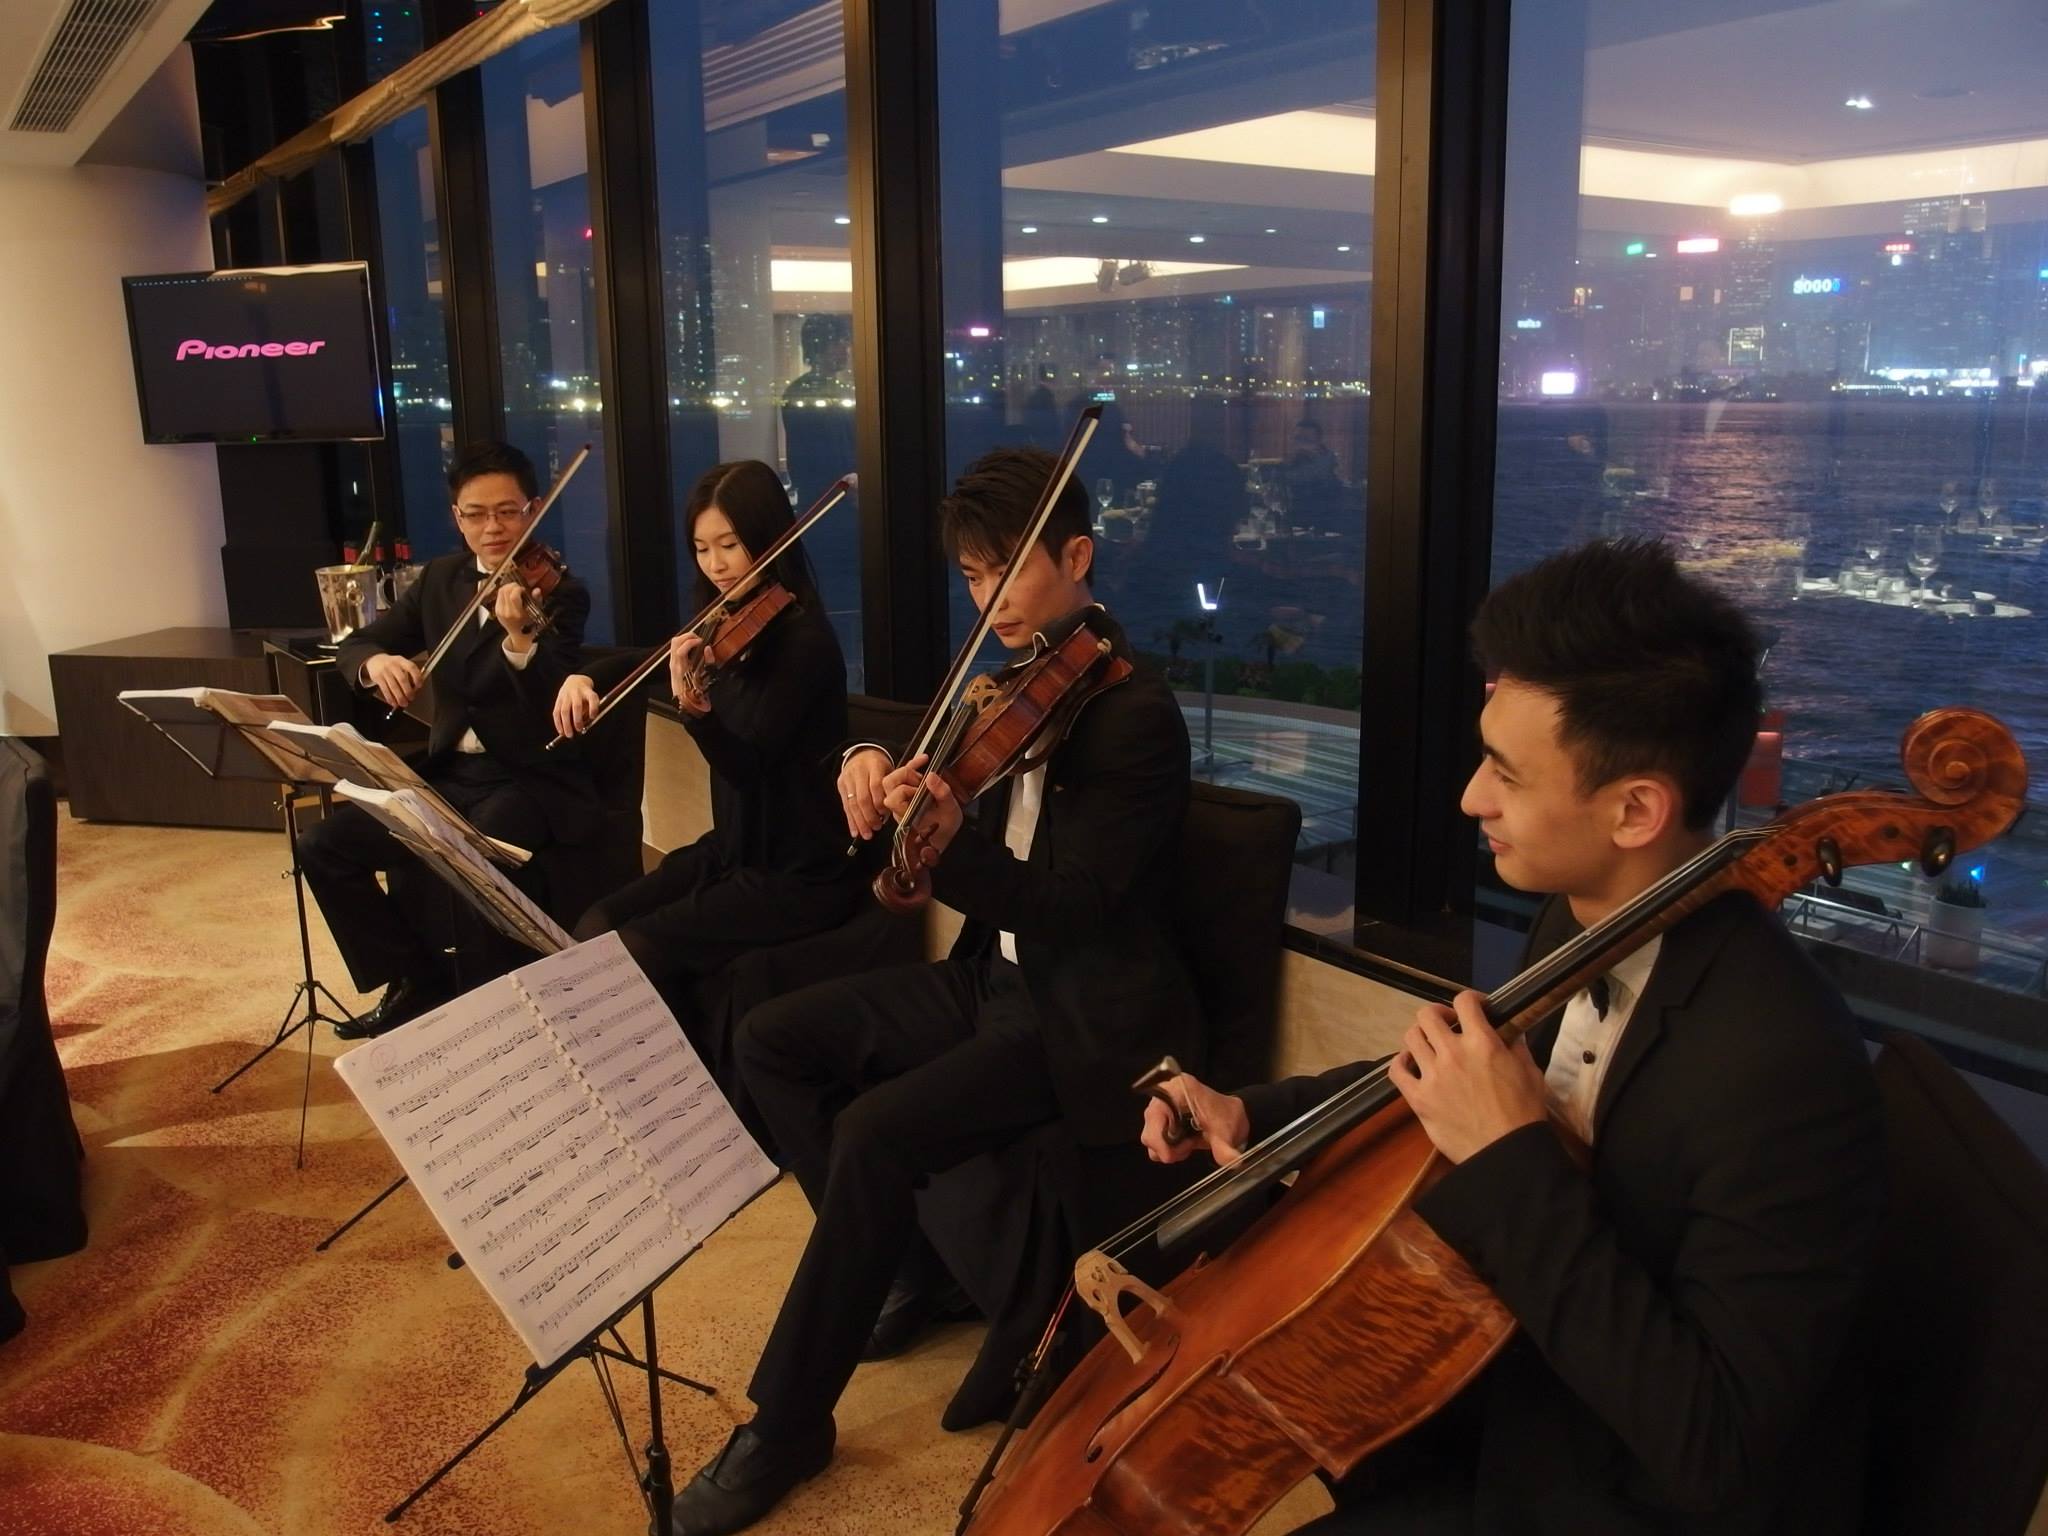 Unison Production Live Music band performance - Dinner reception at InterContinental Hong Kong